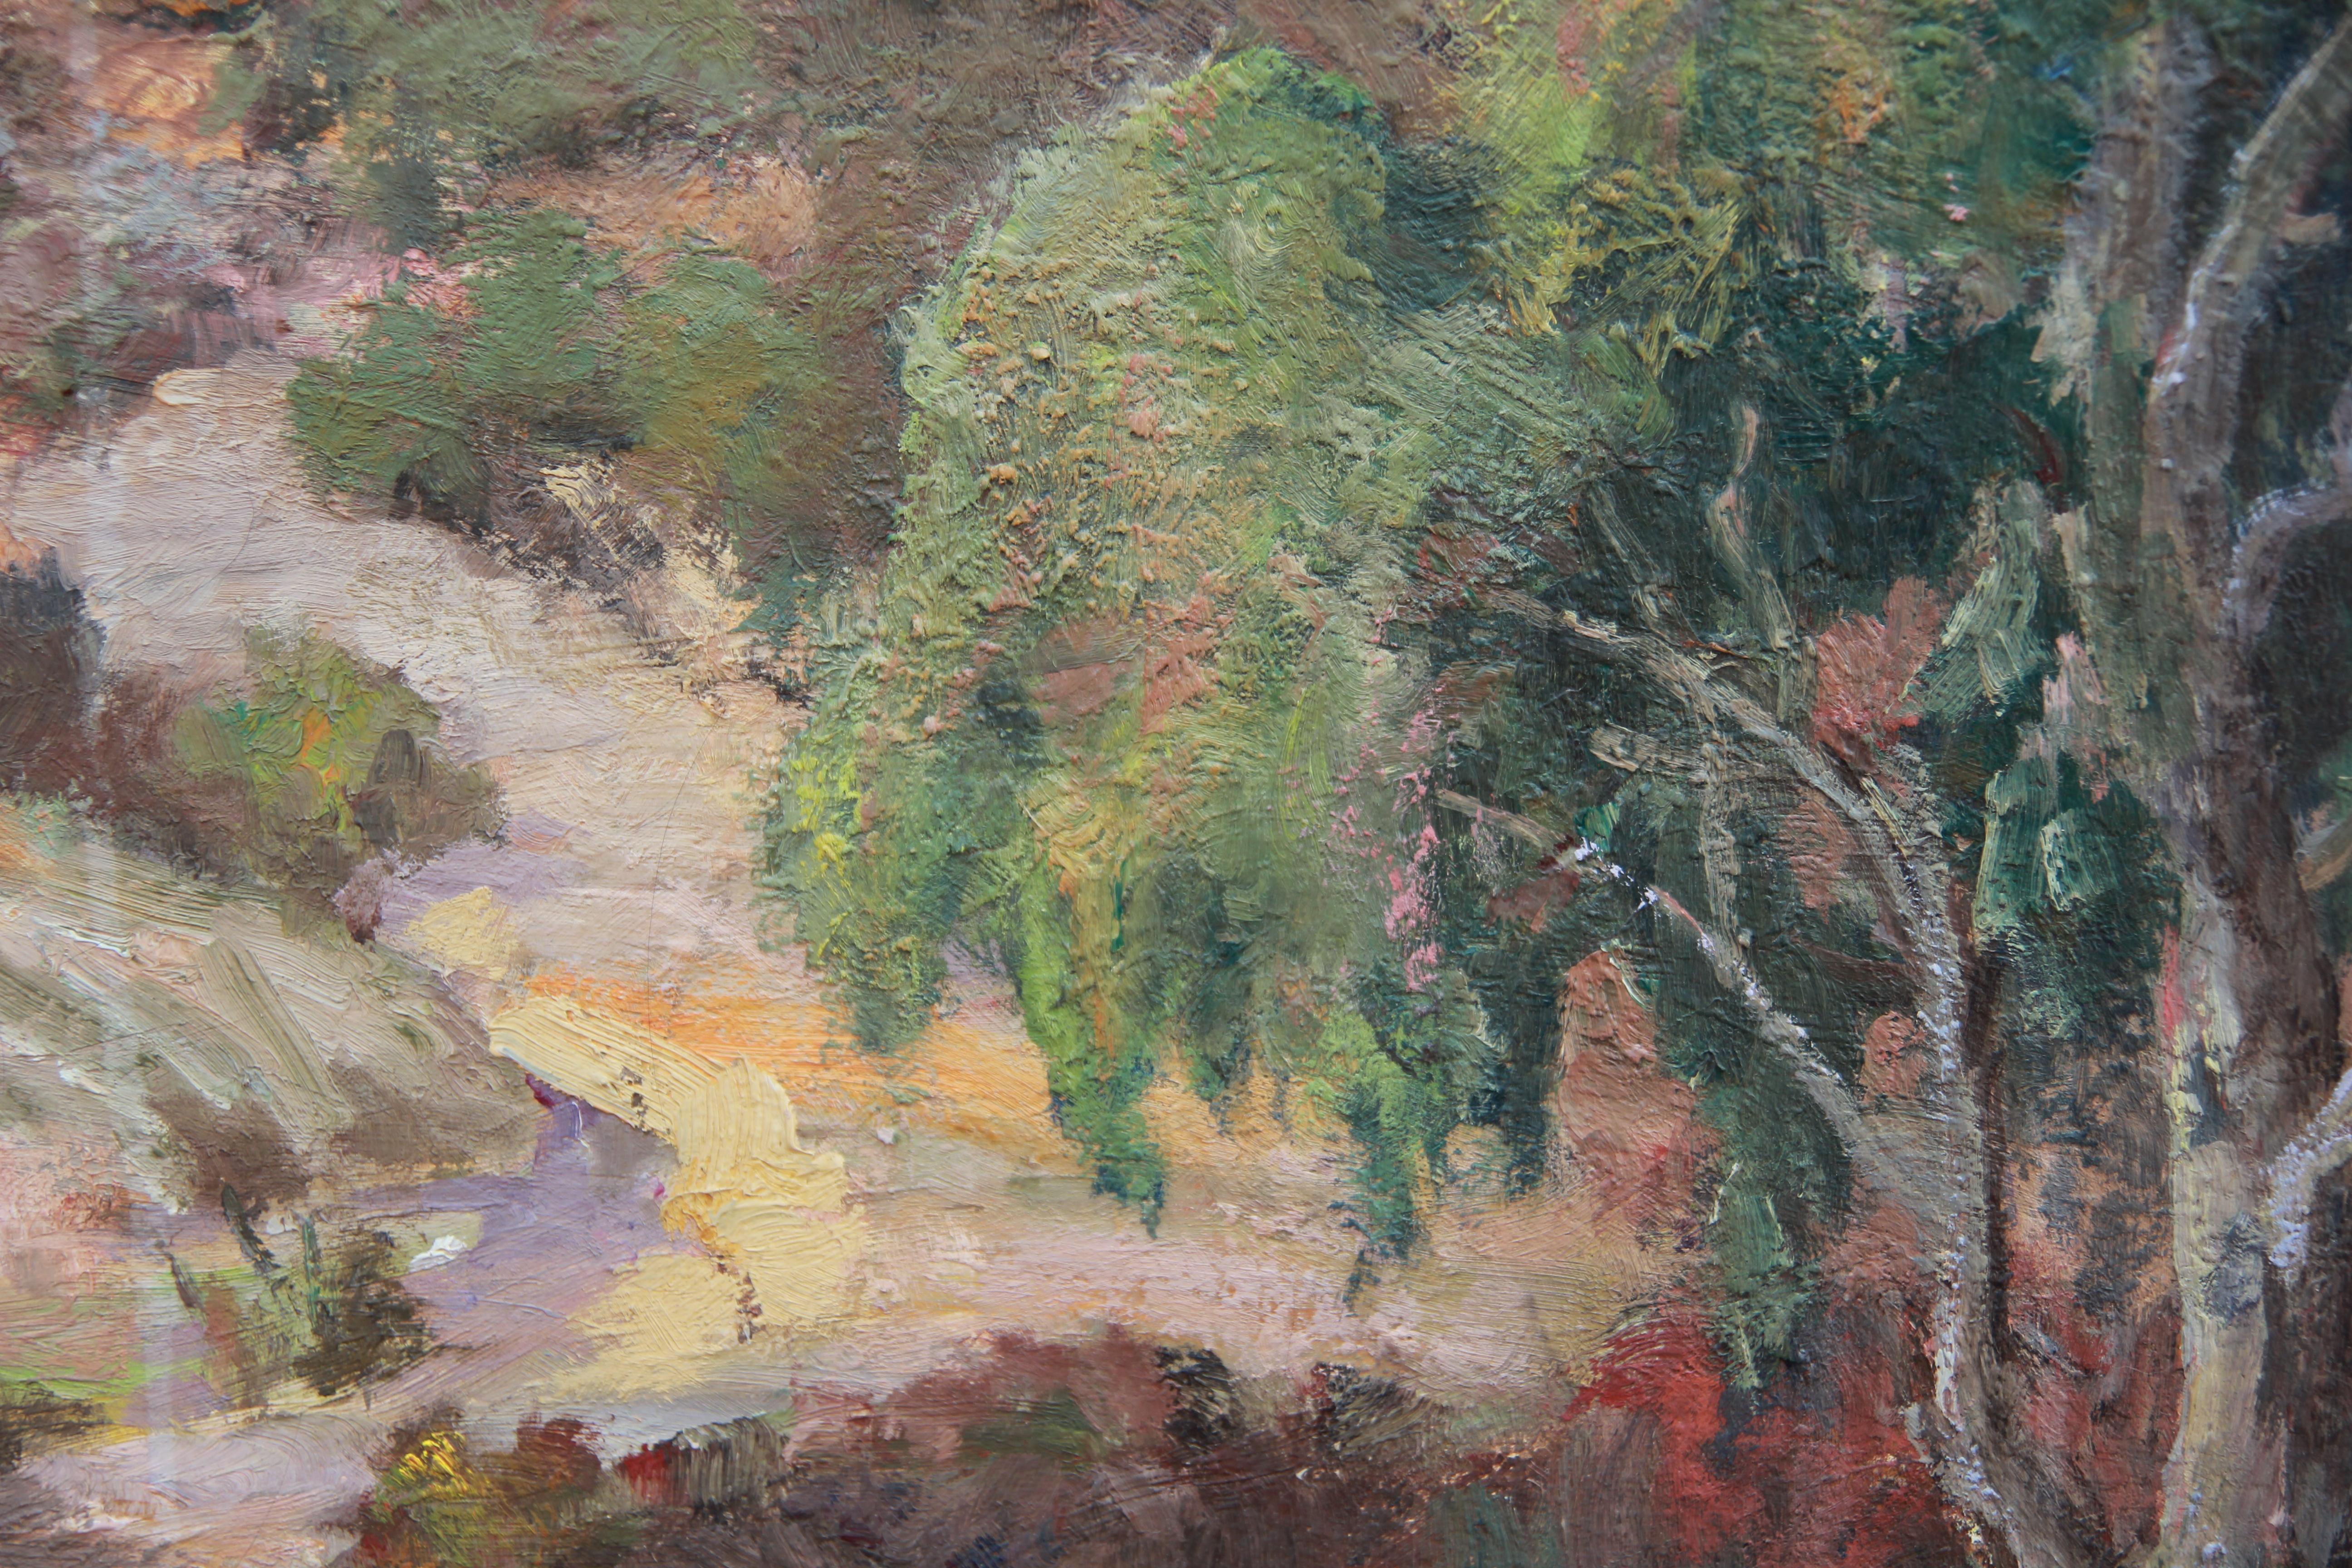 California landscape painting of a rural landscape in an impressionist style. The work is signed and titled by the artist on the bottom of the canvas and the back of the canvas.
Dimensions without Frame: H 26 in x W 32 in x D 1 in. 

Artist